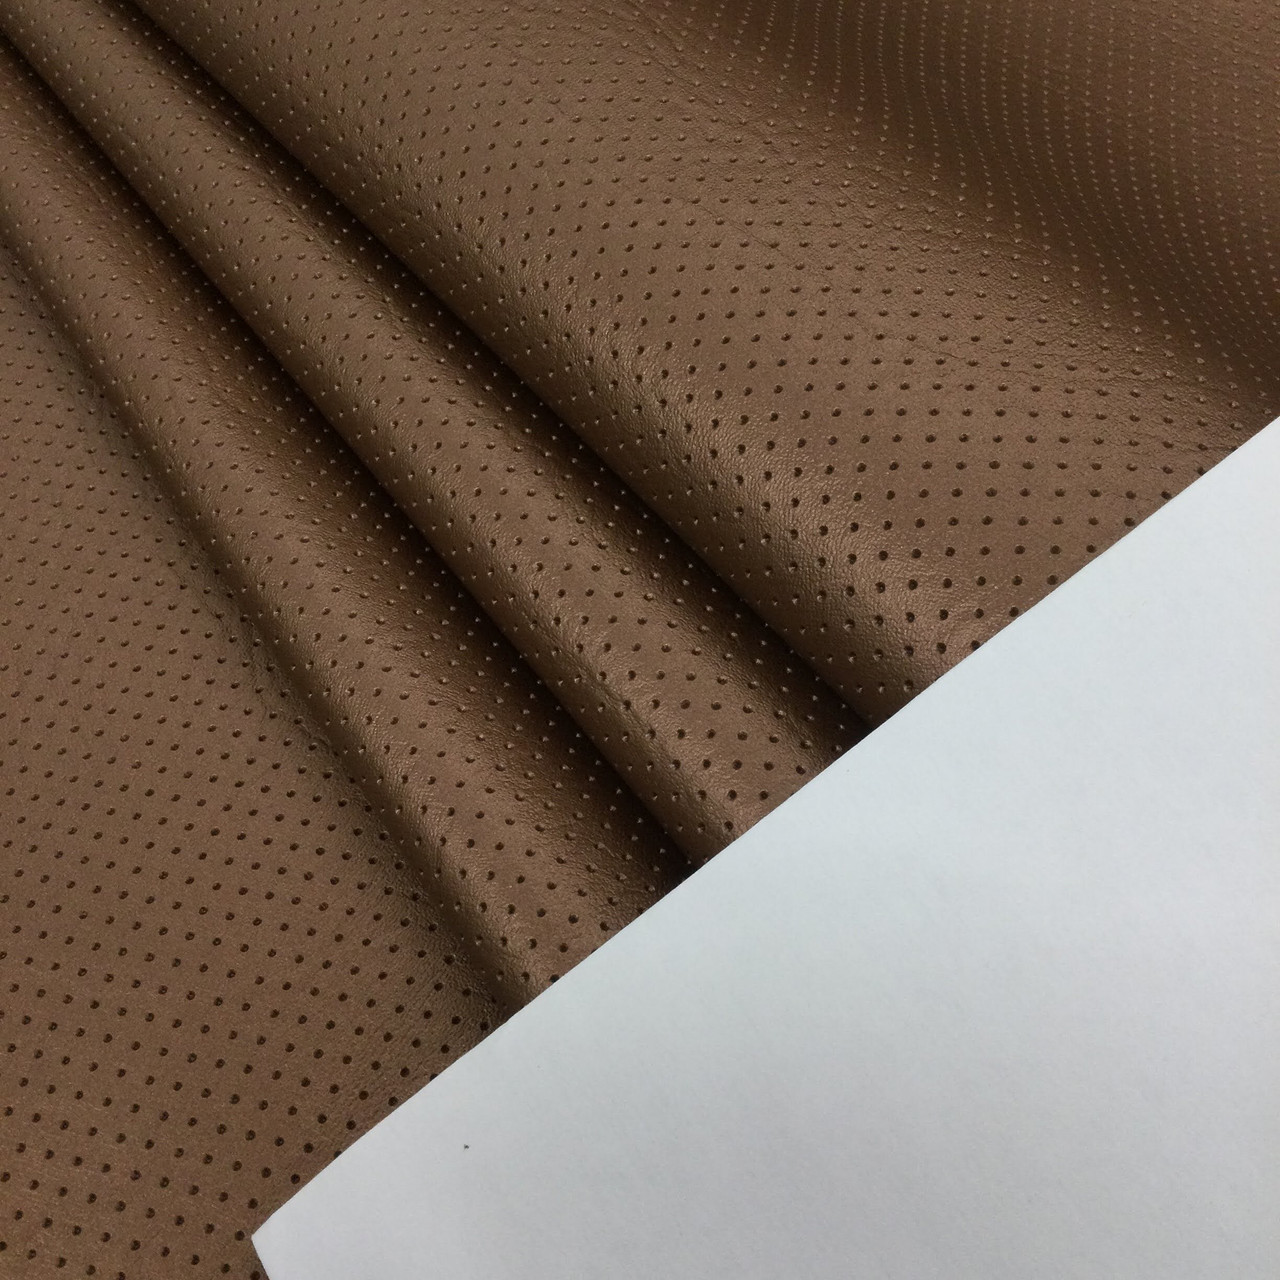 Expanded Vinyl Cayman Copper Fabric